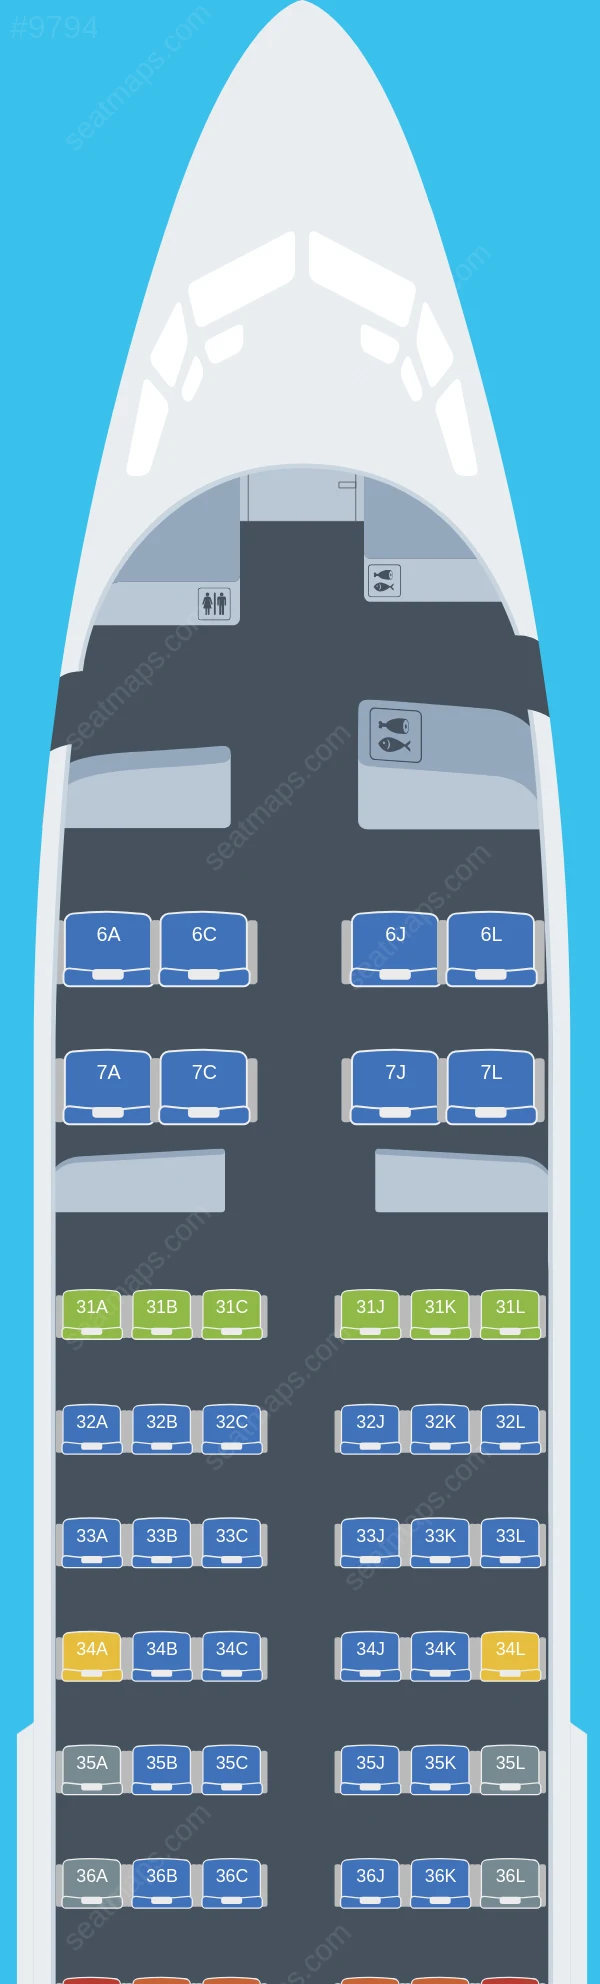 Shanghai Airlines Boeing 737-700 V.1 seatmap preview